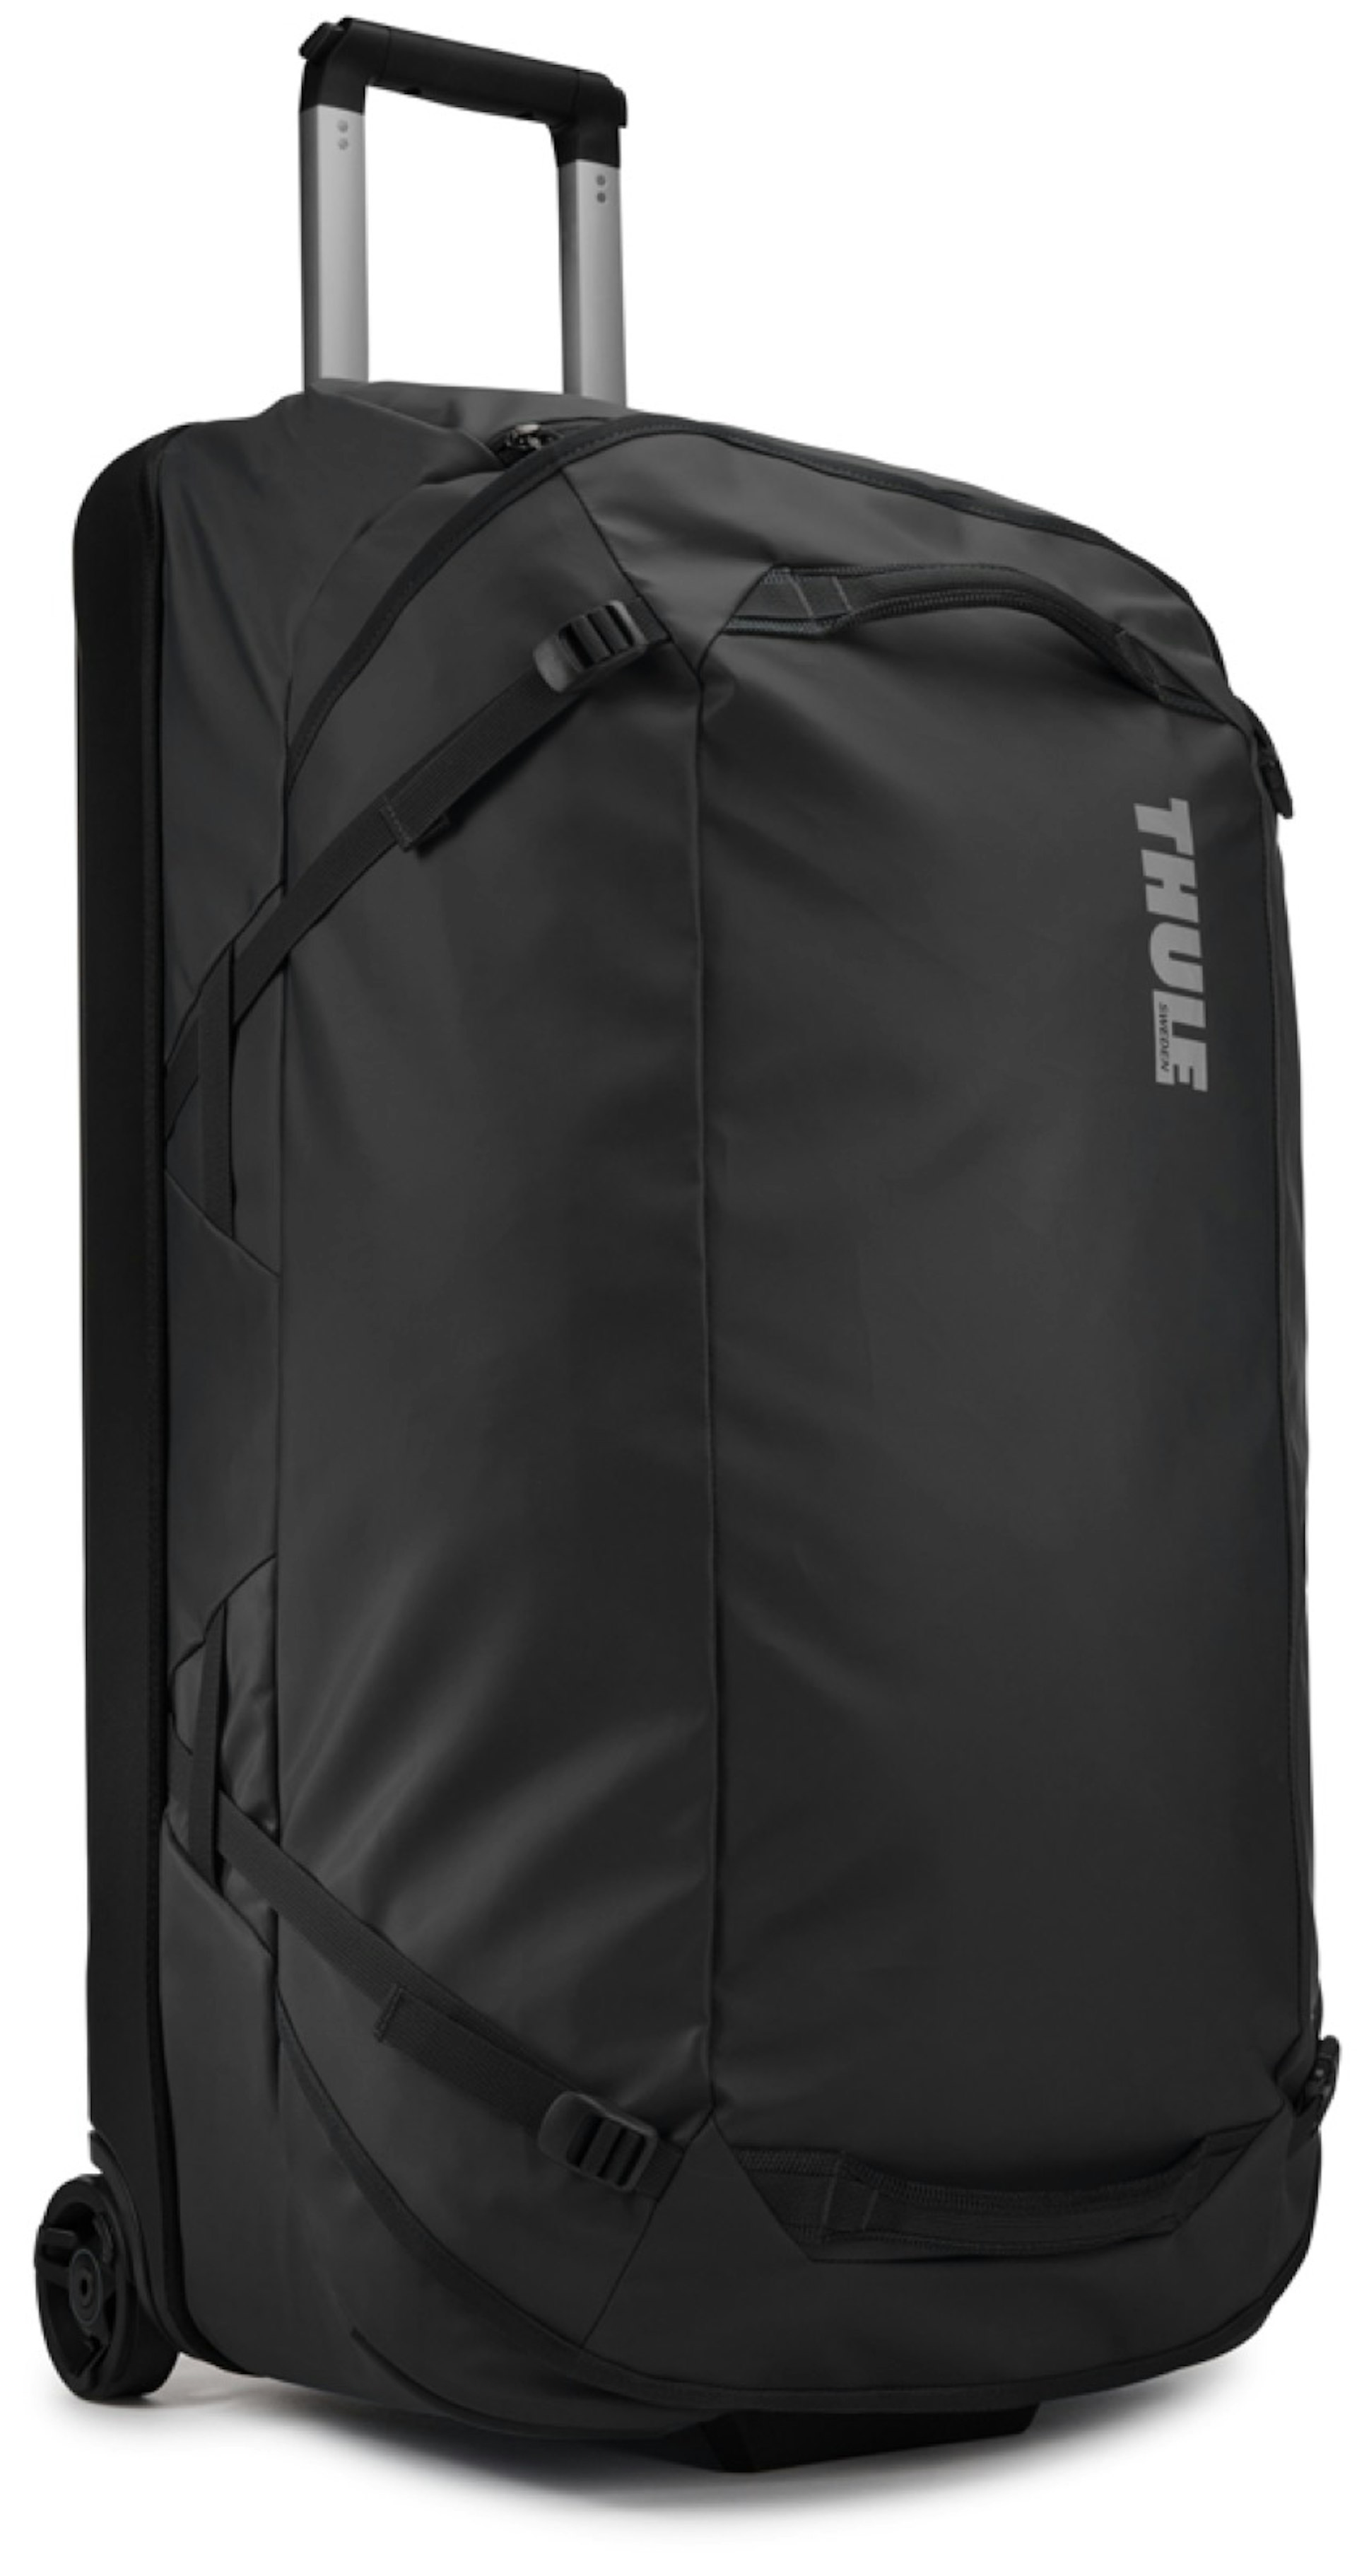 a black duffle bag with the word THULE printed in grey across the front has wheels and a telescoping handle